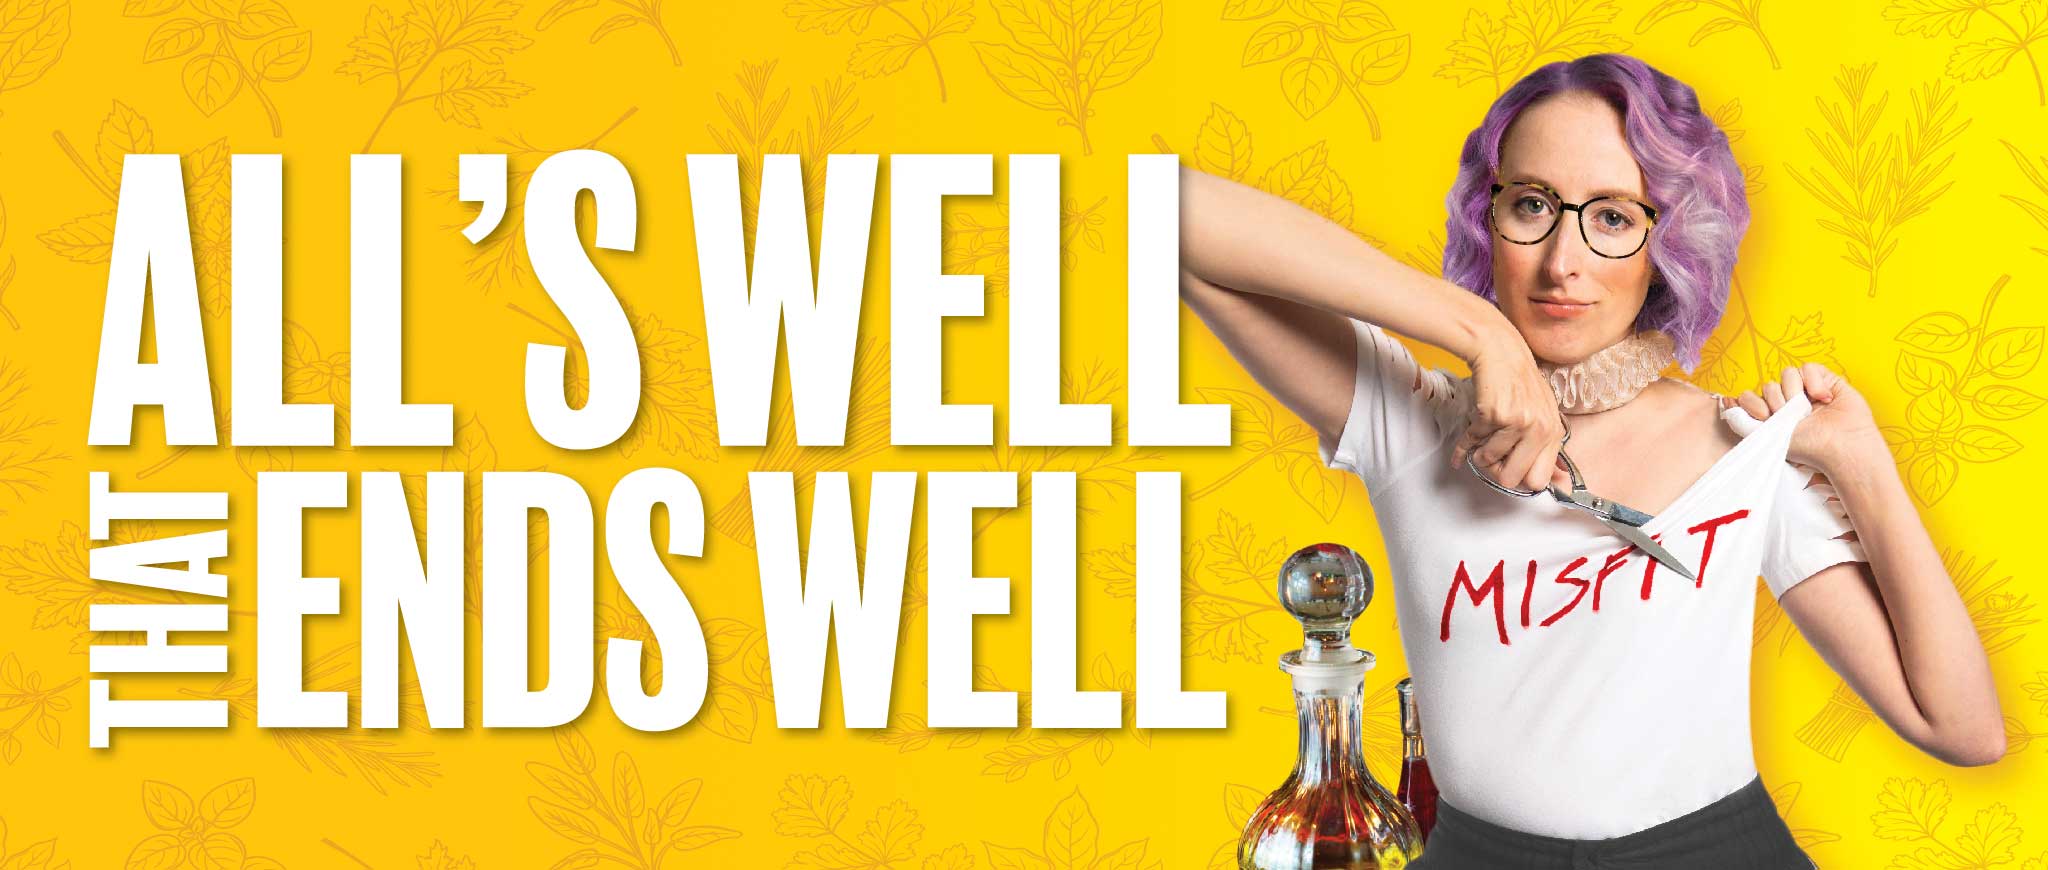 Oregon Shakespeare Festival - All's Well That Ends Well